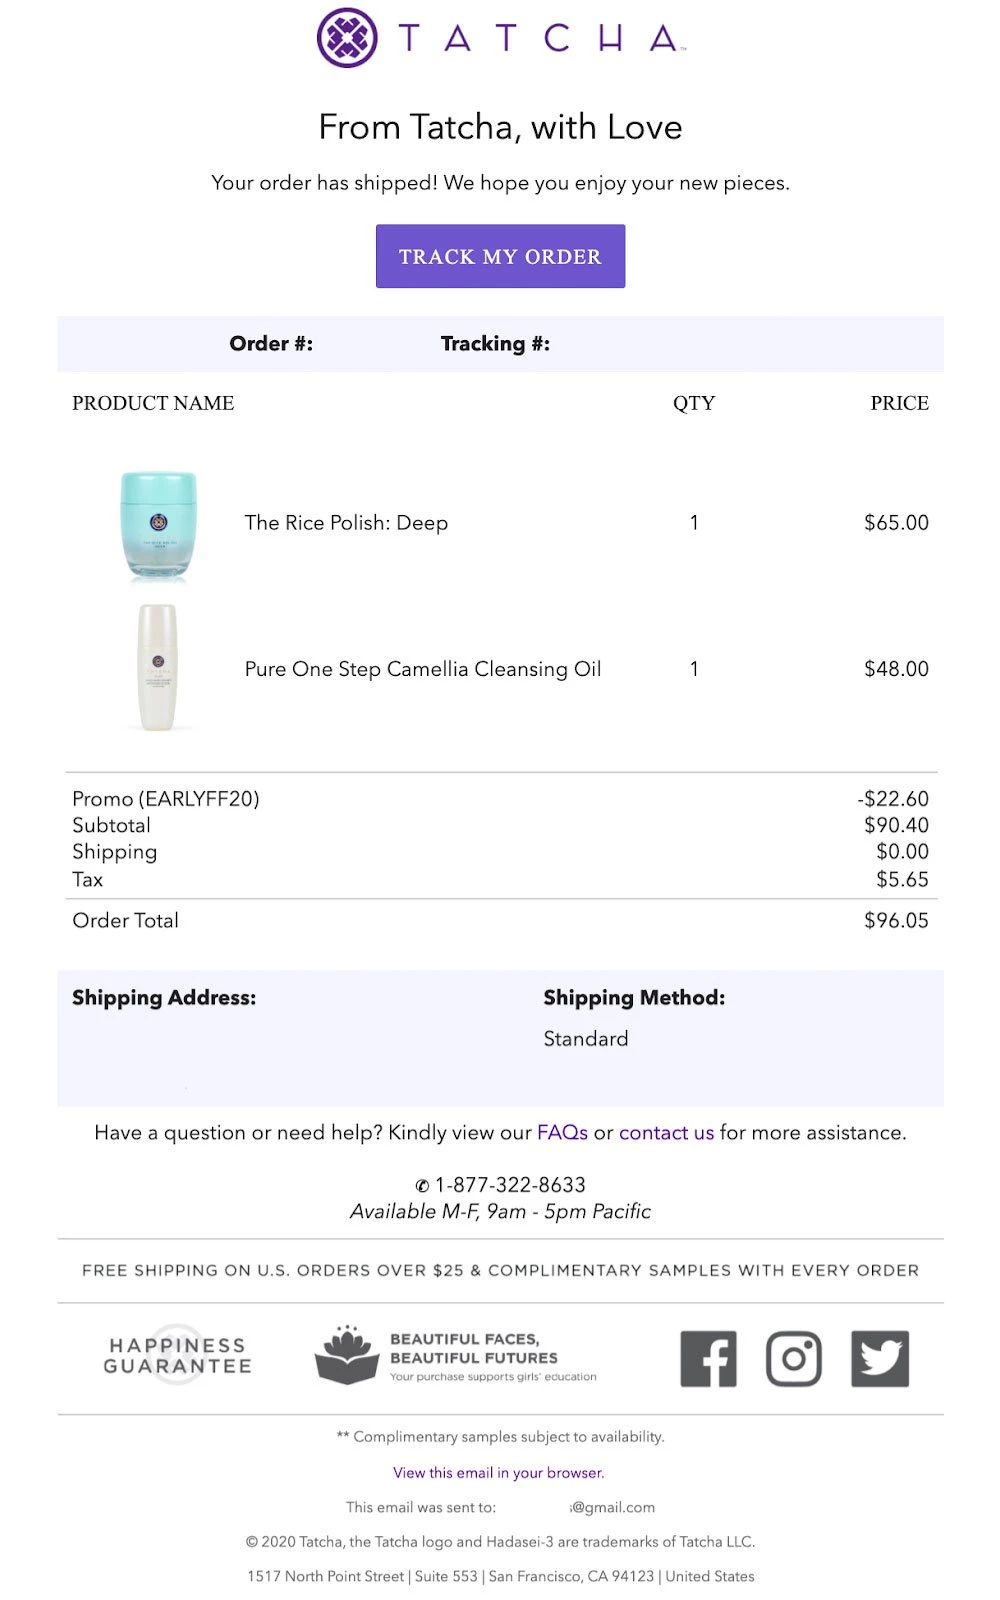 A shipping confirmation email example from Tatcha. 